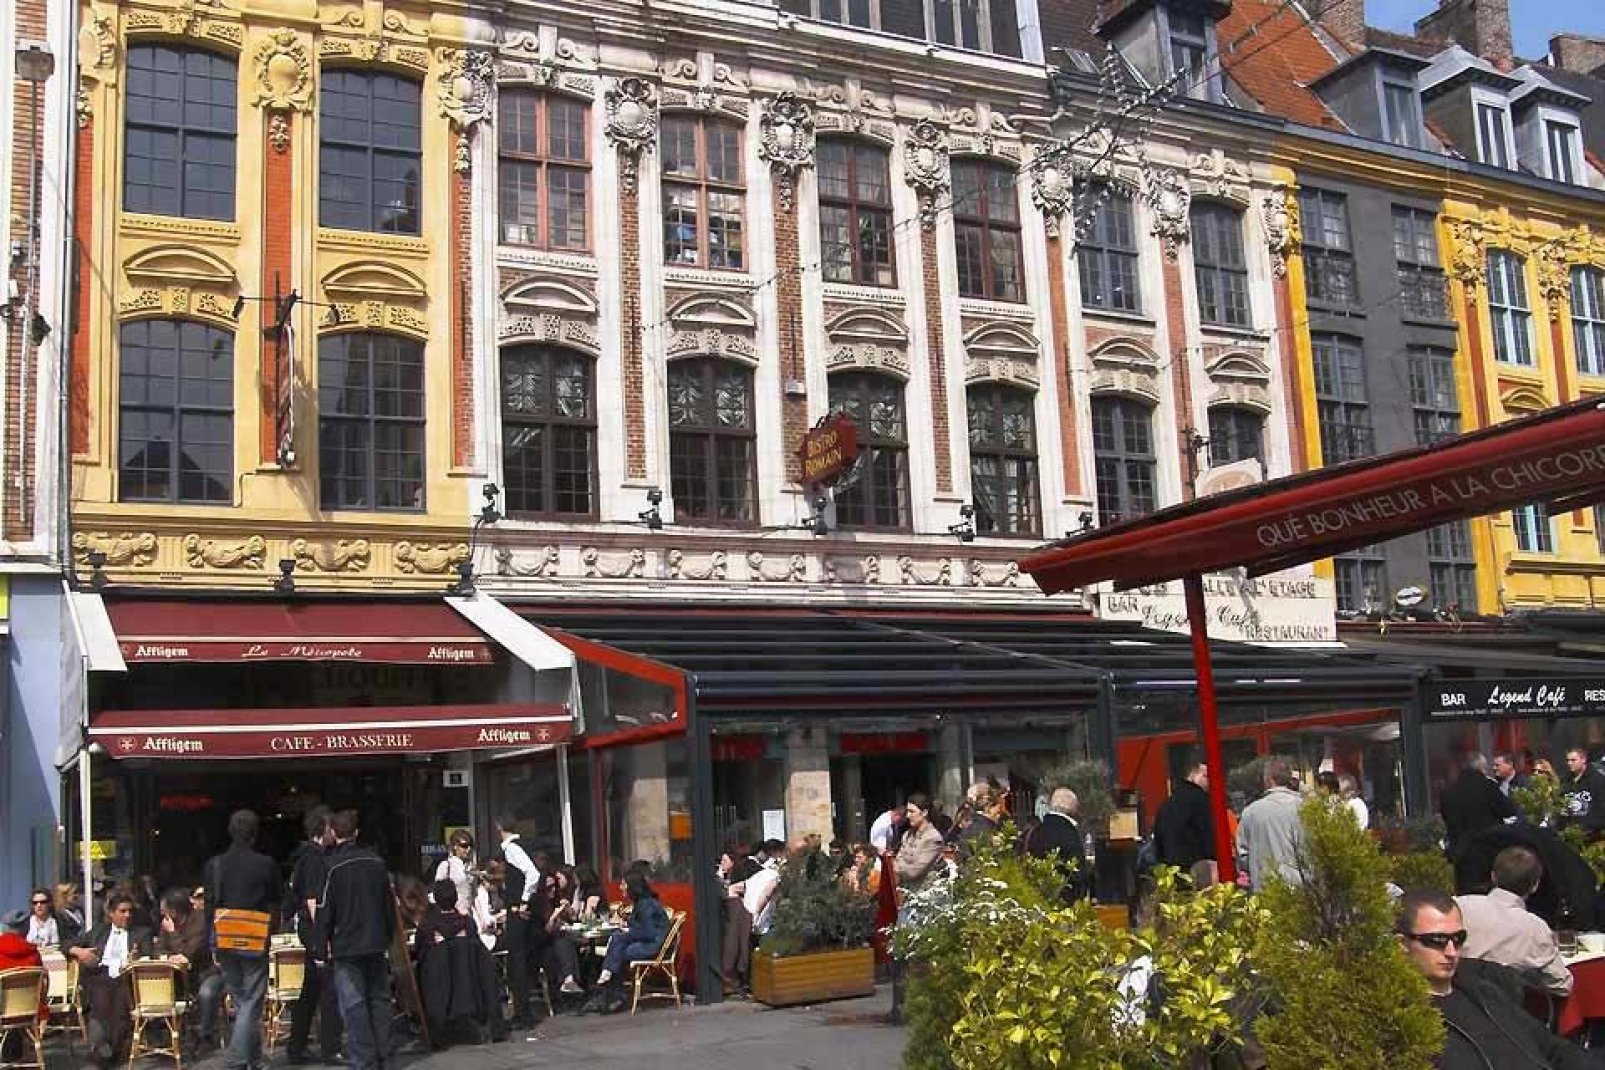 Home to around 230,000 inhabitants, the city of Lille is always on the move.